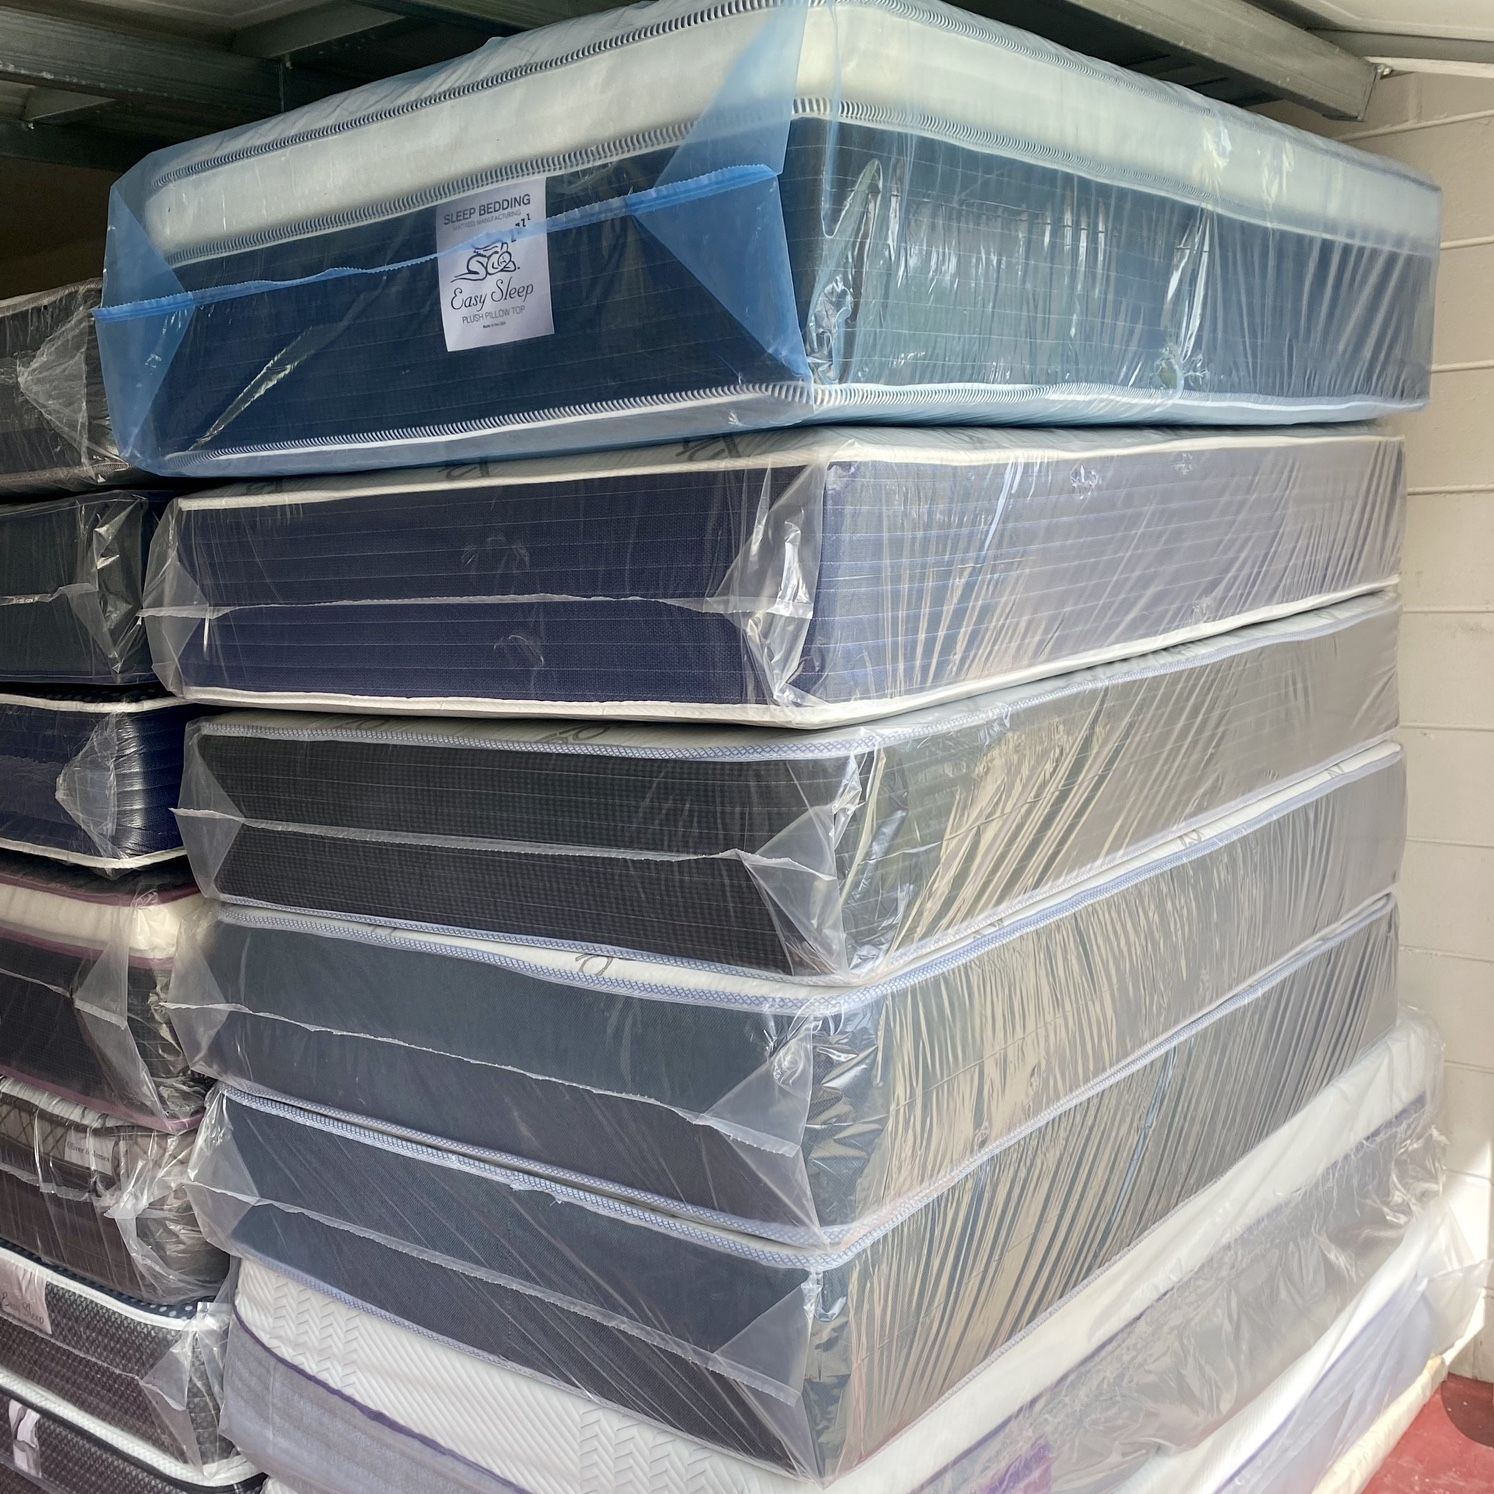 Twin Size Mattress 14 Inch Thick With Pillow Top And Box Springs New From Factory Available All Sizes Same Day Delivery 